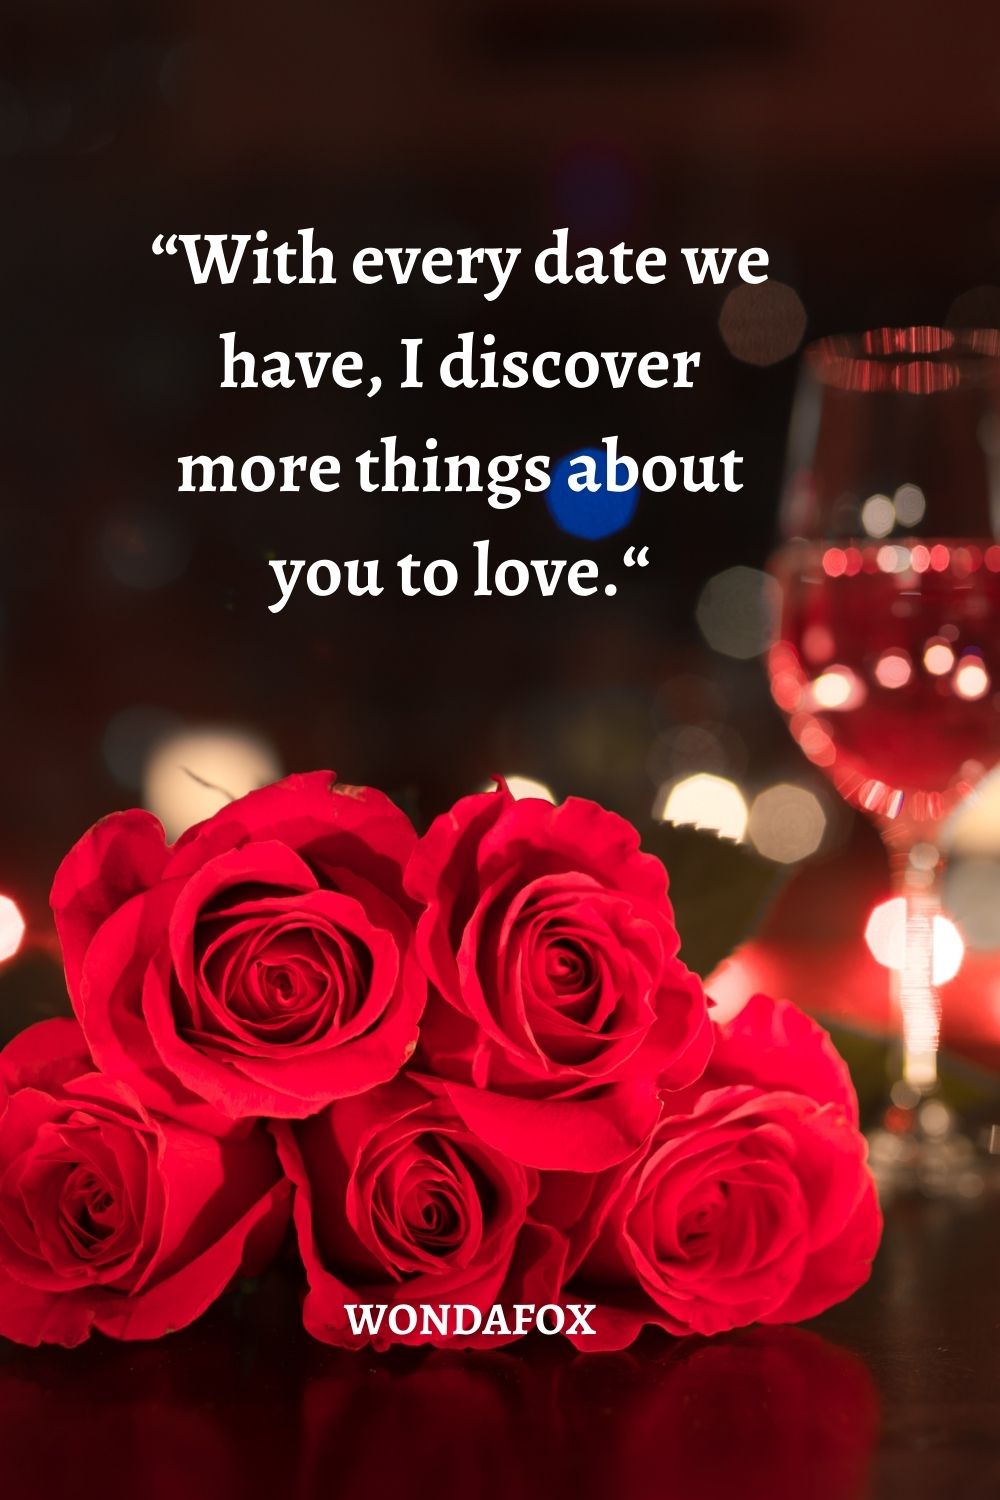 “With every date we have, I discover more things about you to love.“